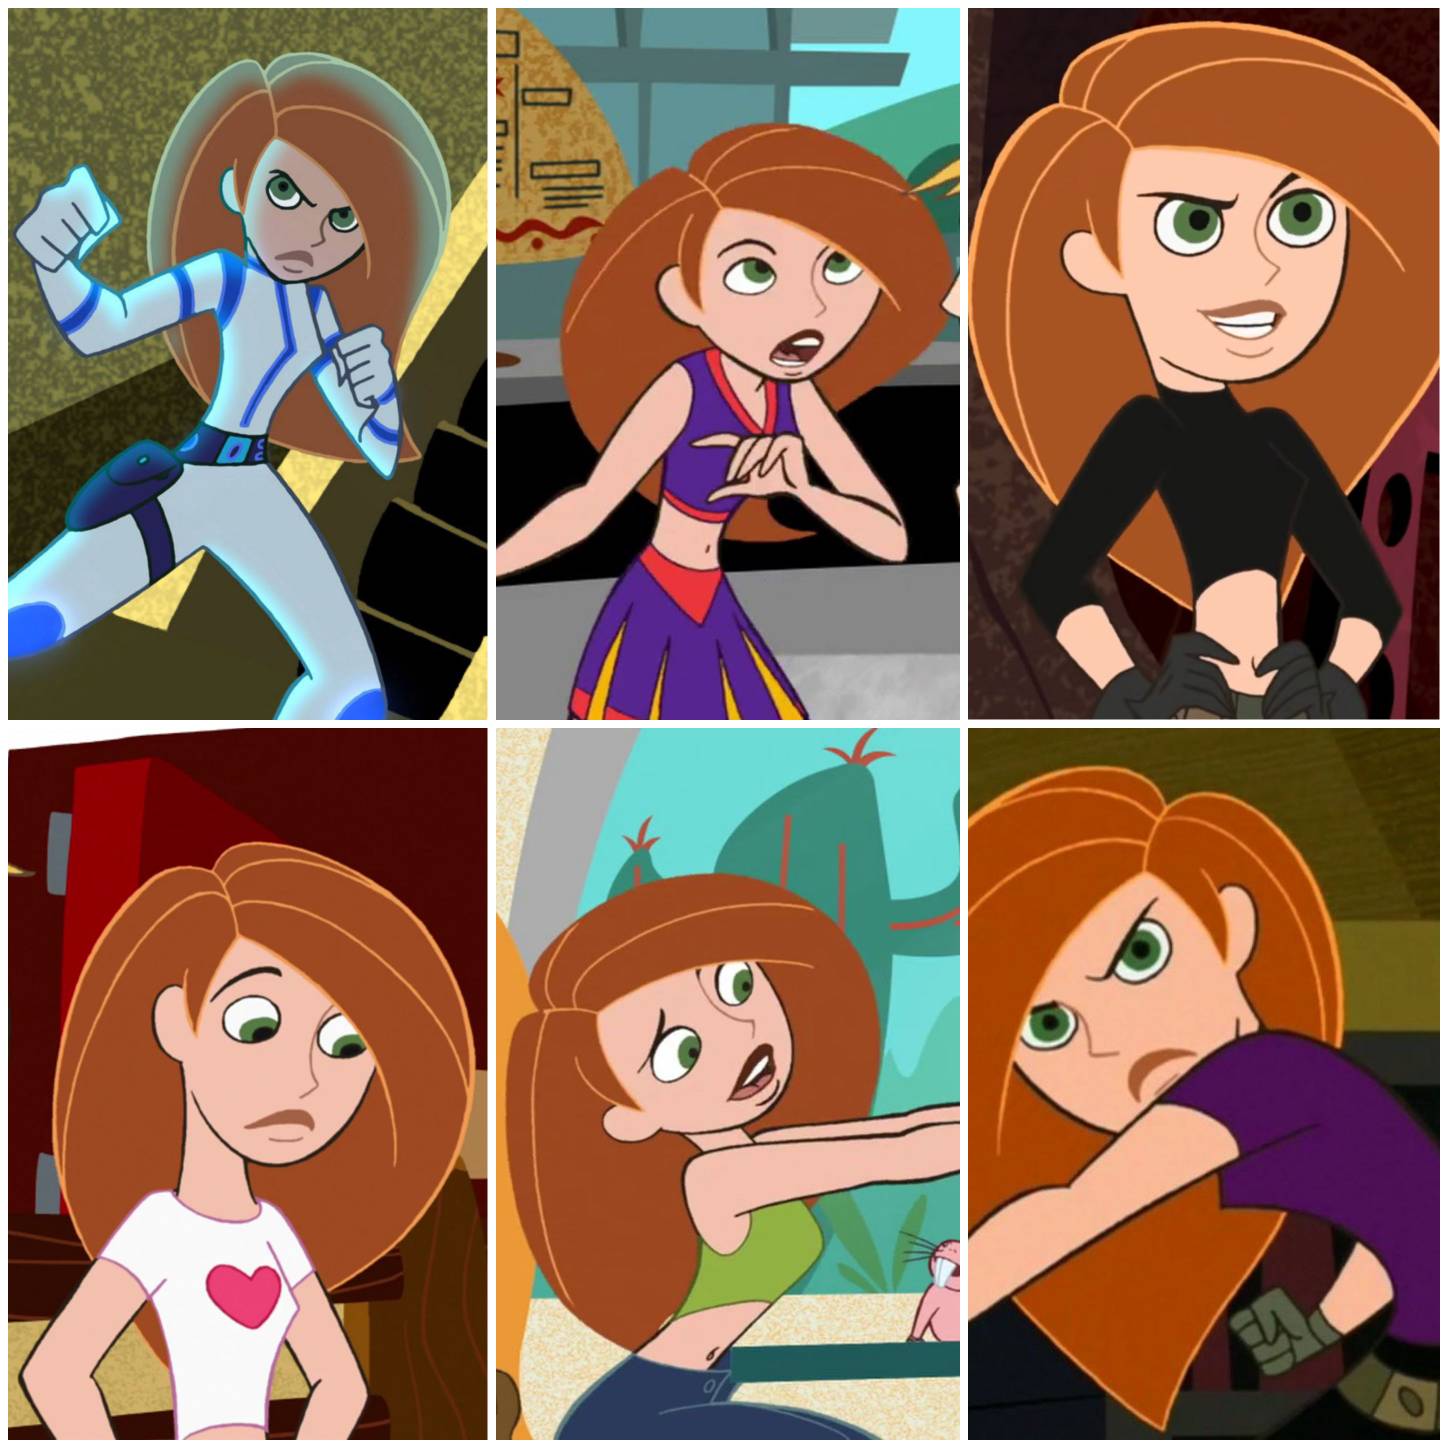 My Favorite Kim Possible Outfits by jzilla-studio on DeviantArt